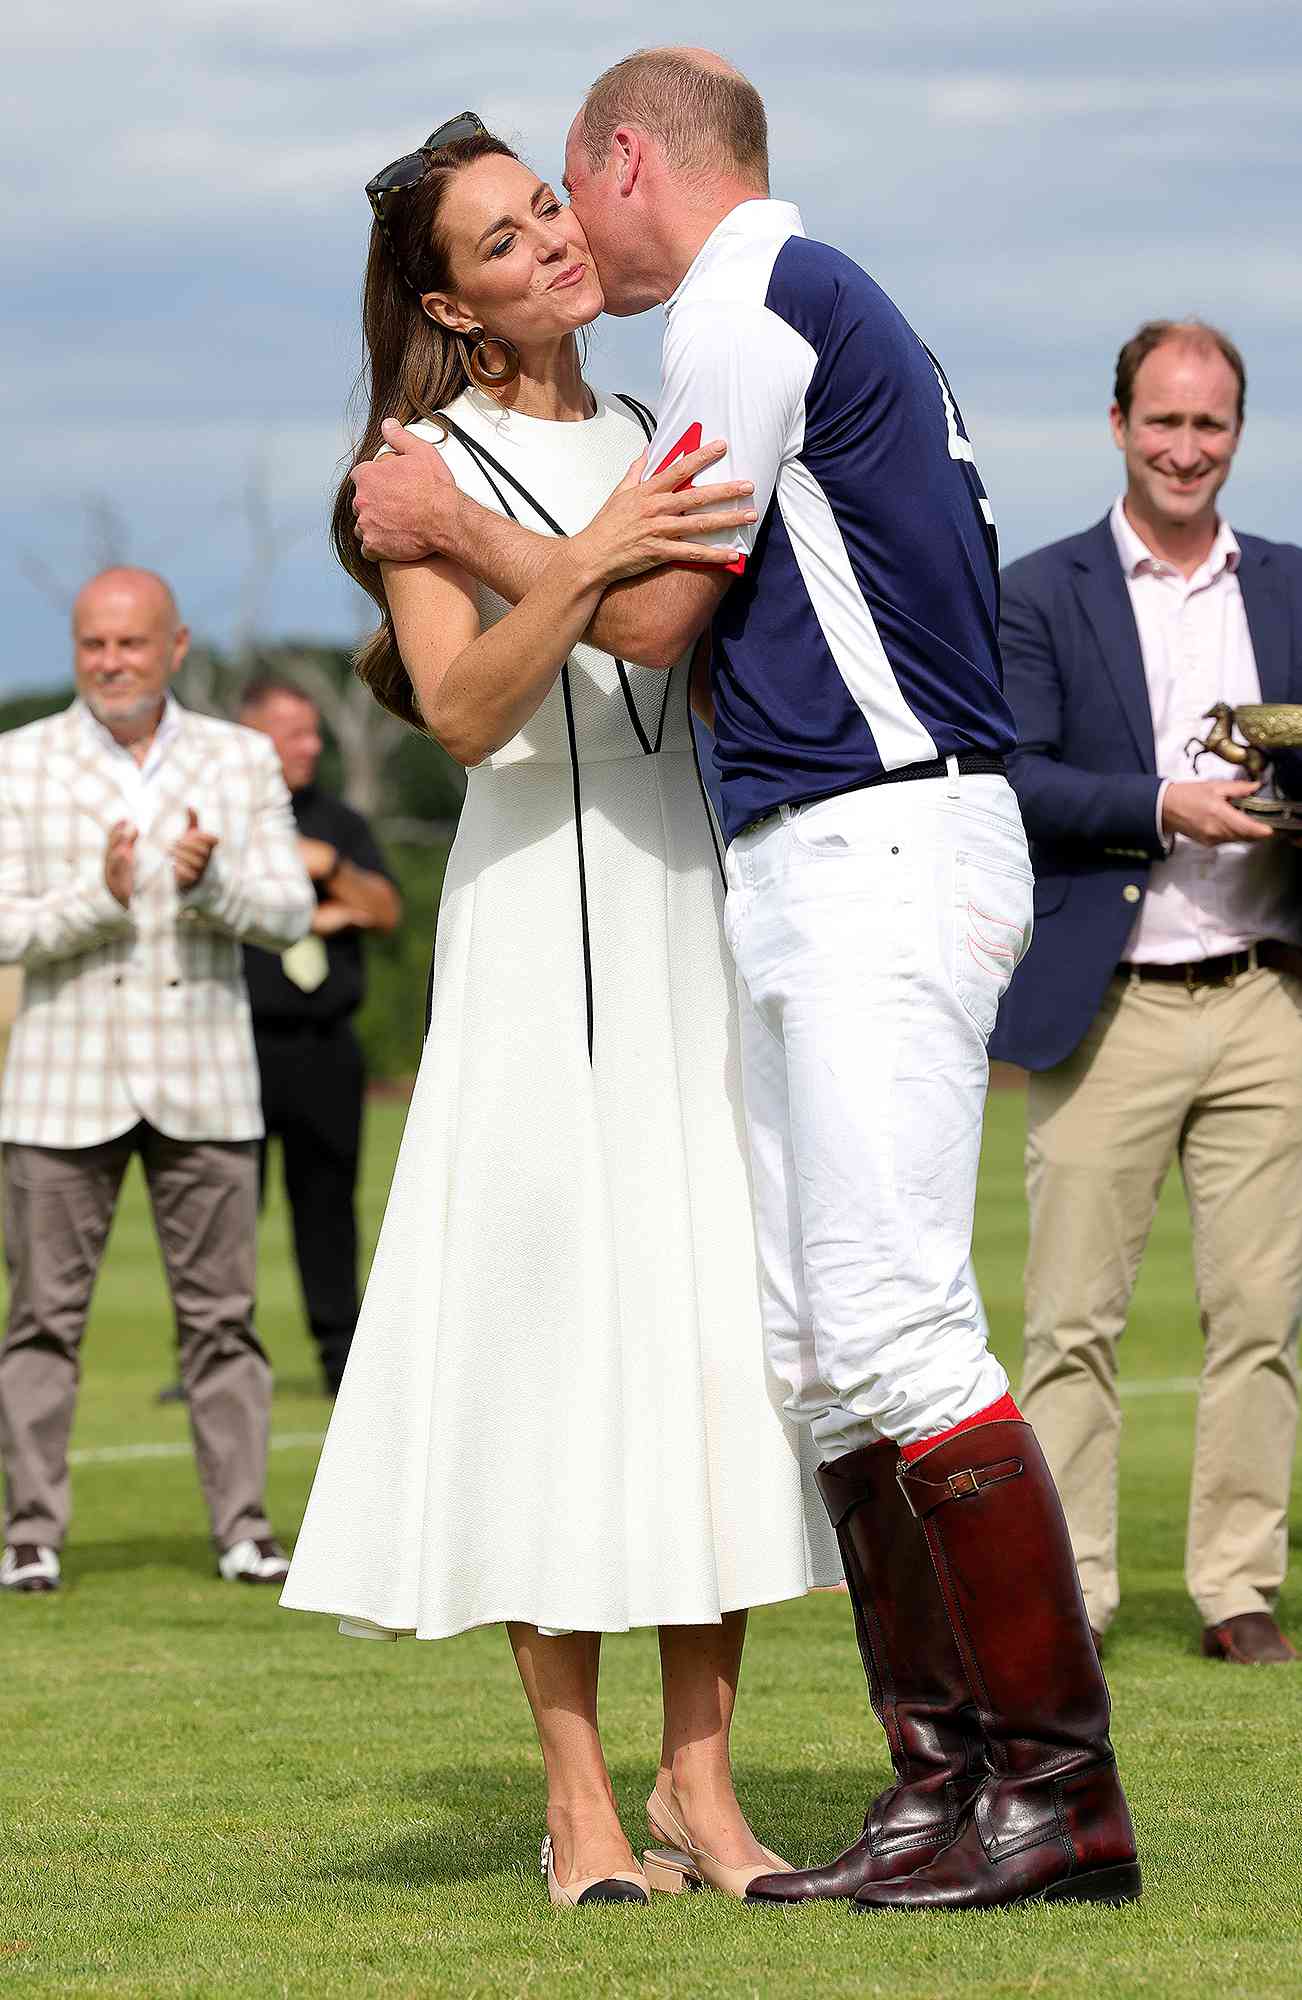 Kate Middleton and Prince William Share Rare PDA at Polo Match: See the Pics!